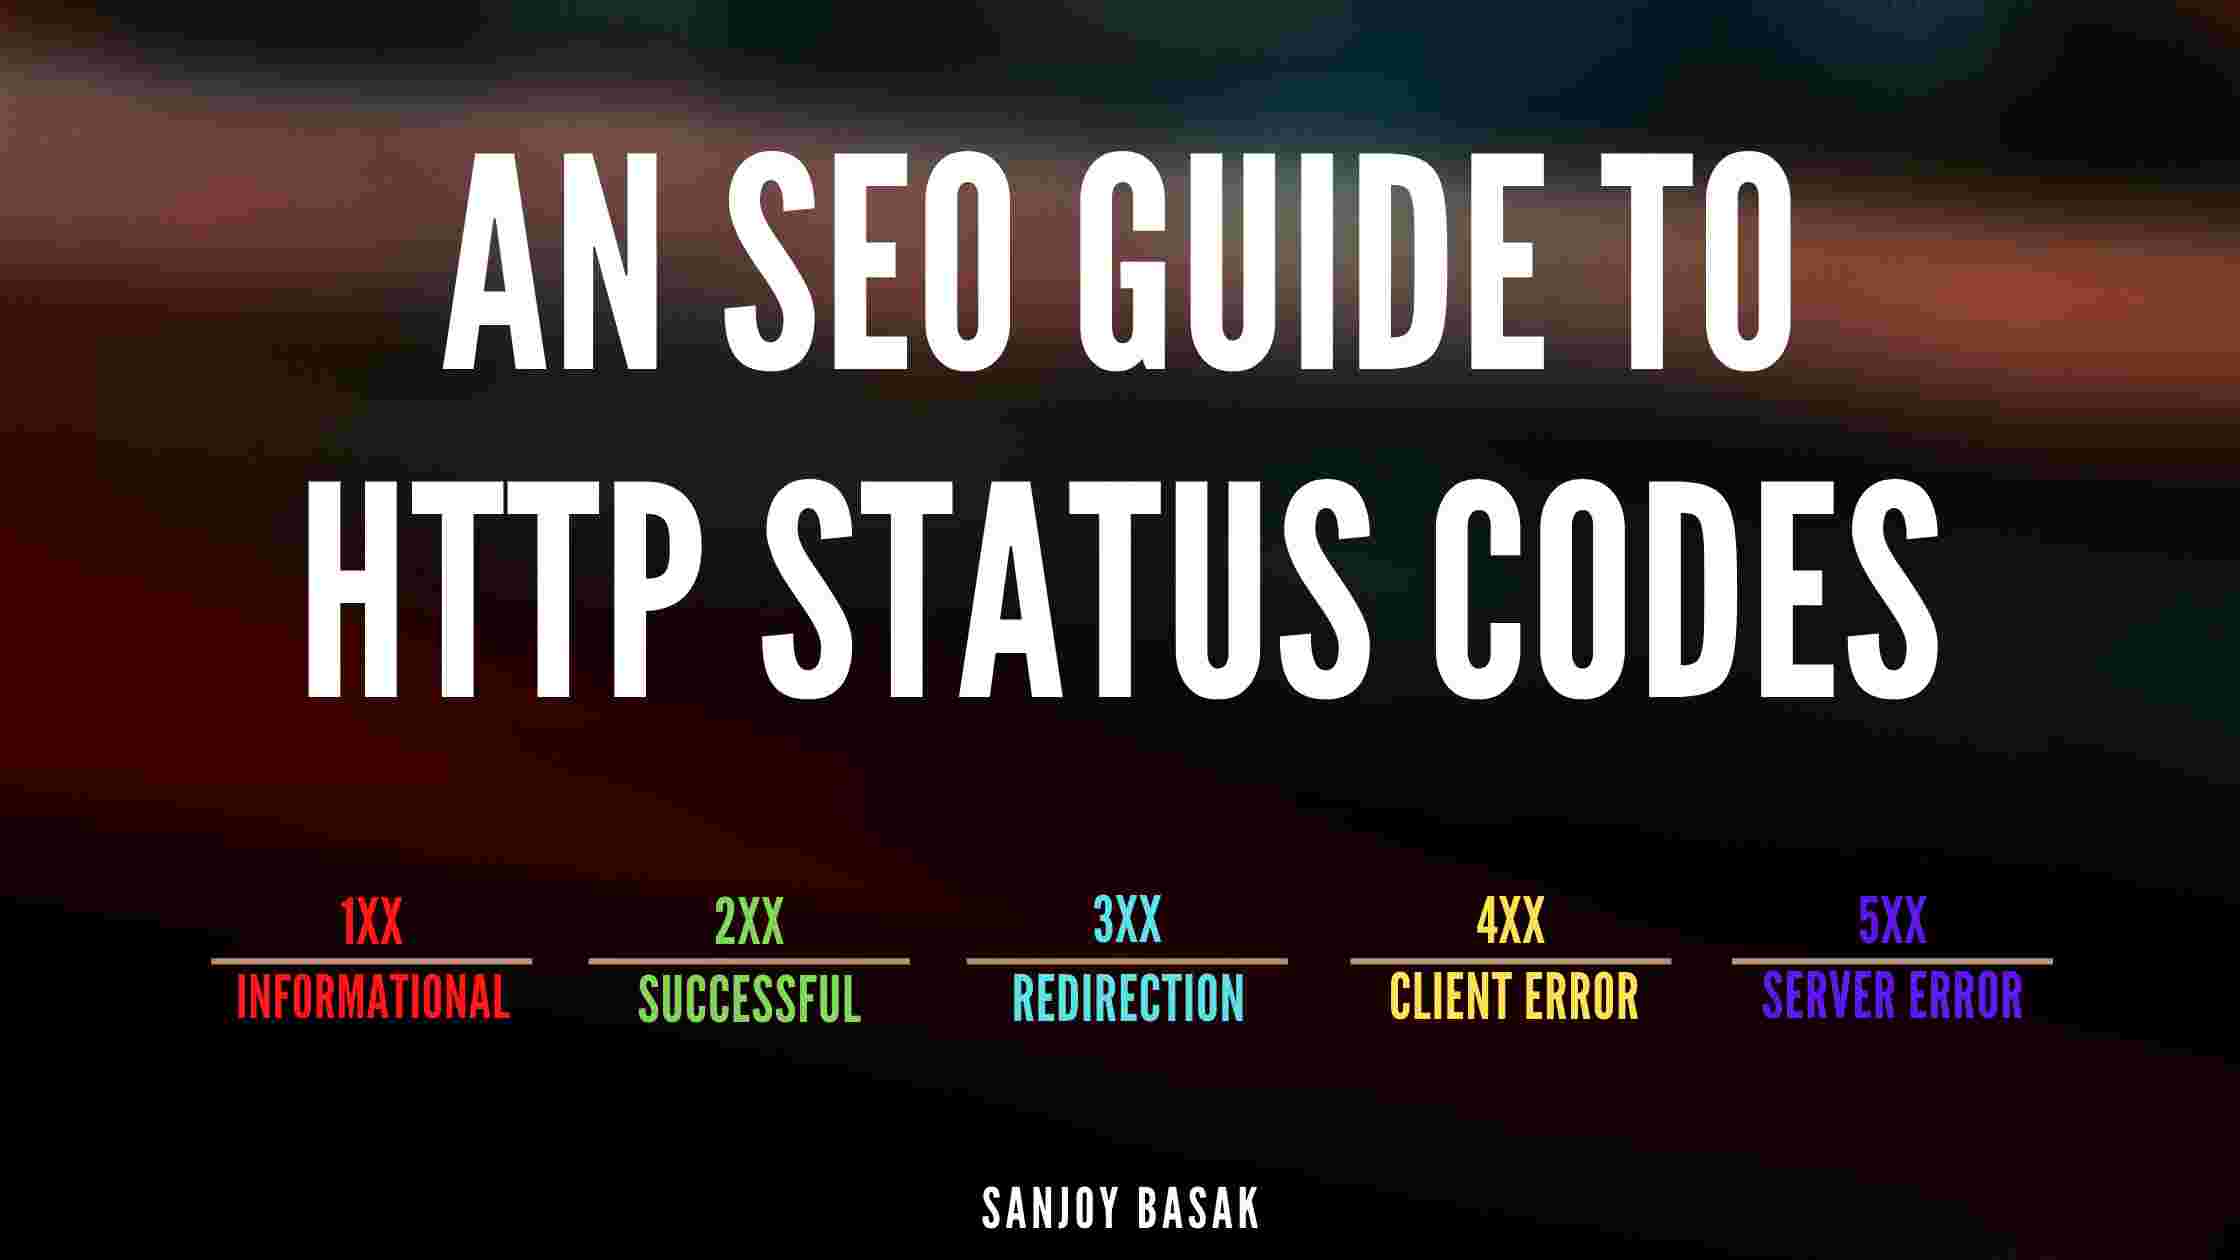 What are http status codes